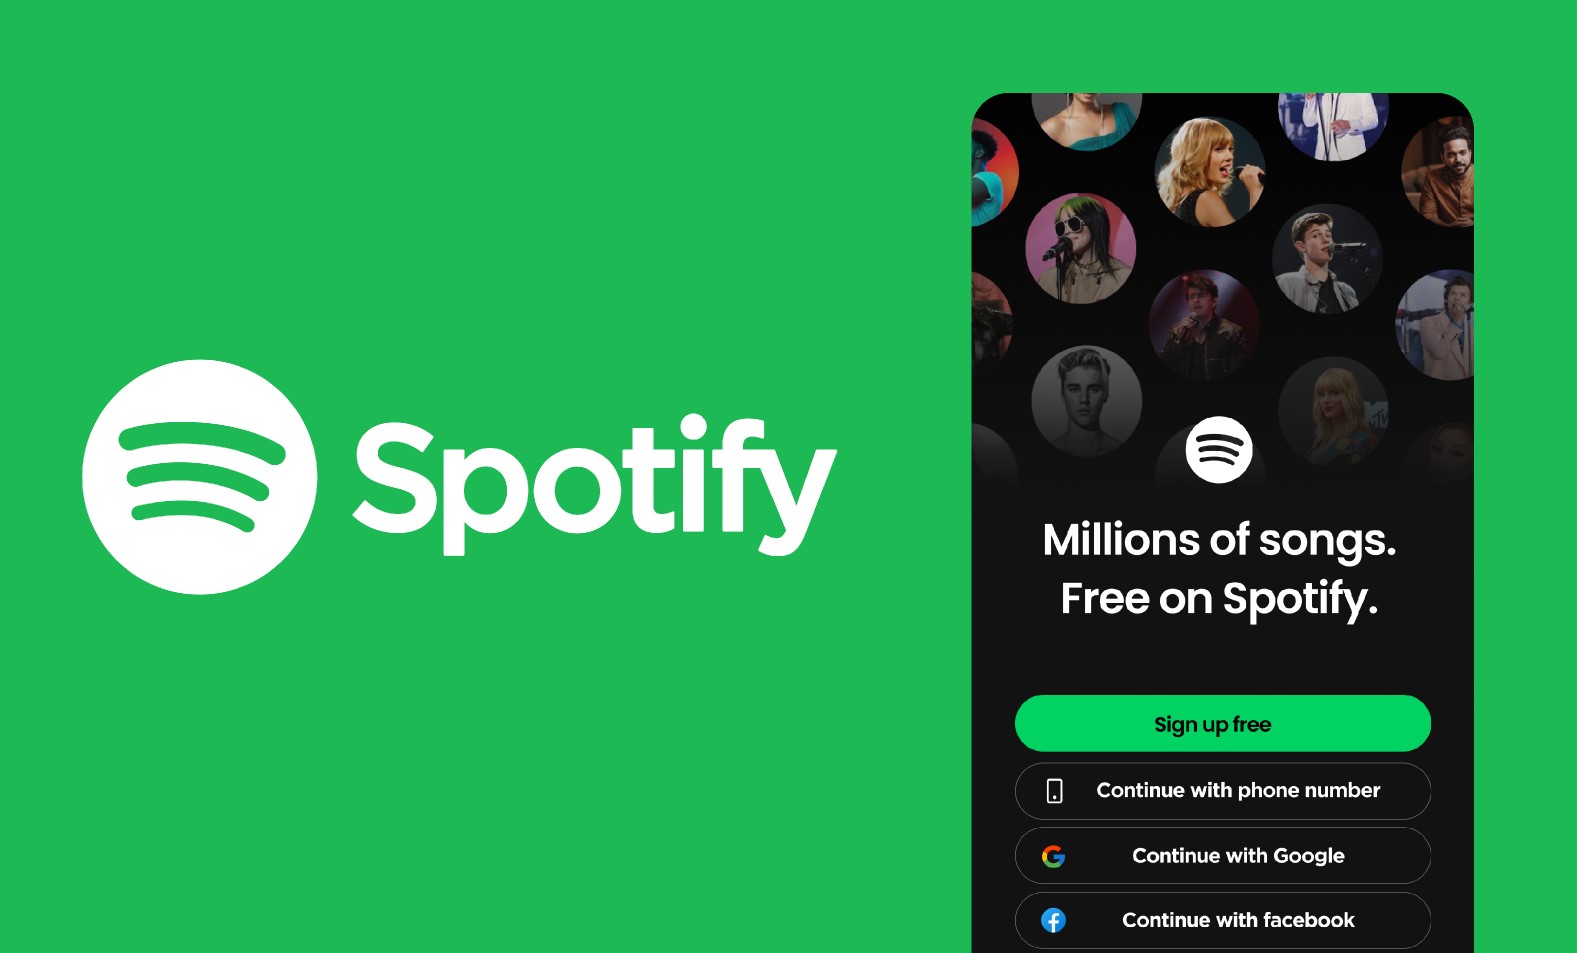 This image shows Spotify’s popular brand logo and a portion of its mobile app’s signup page.